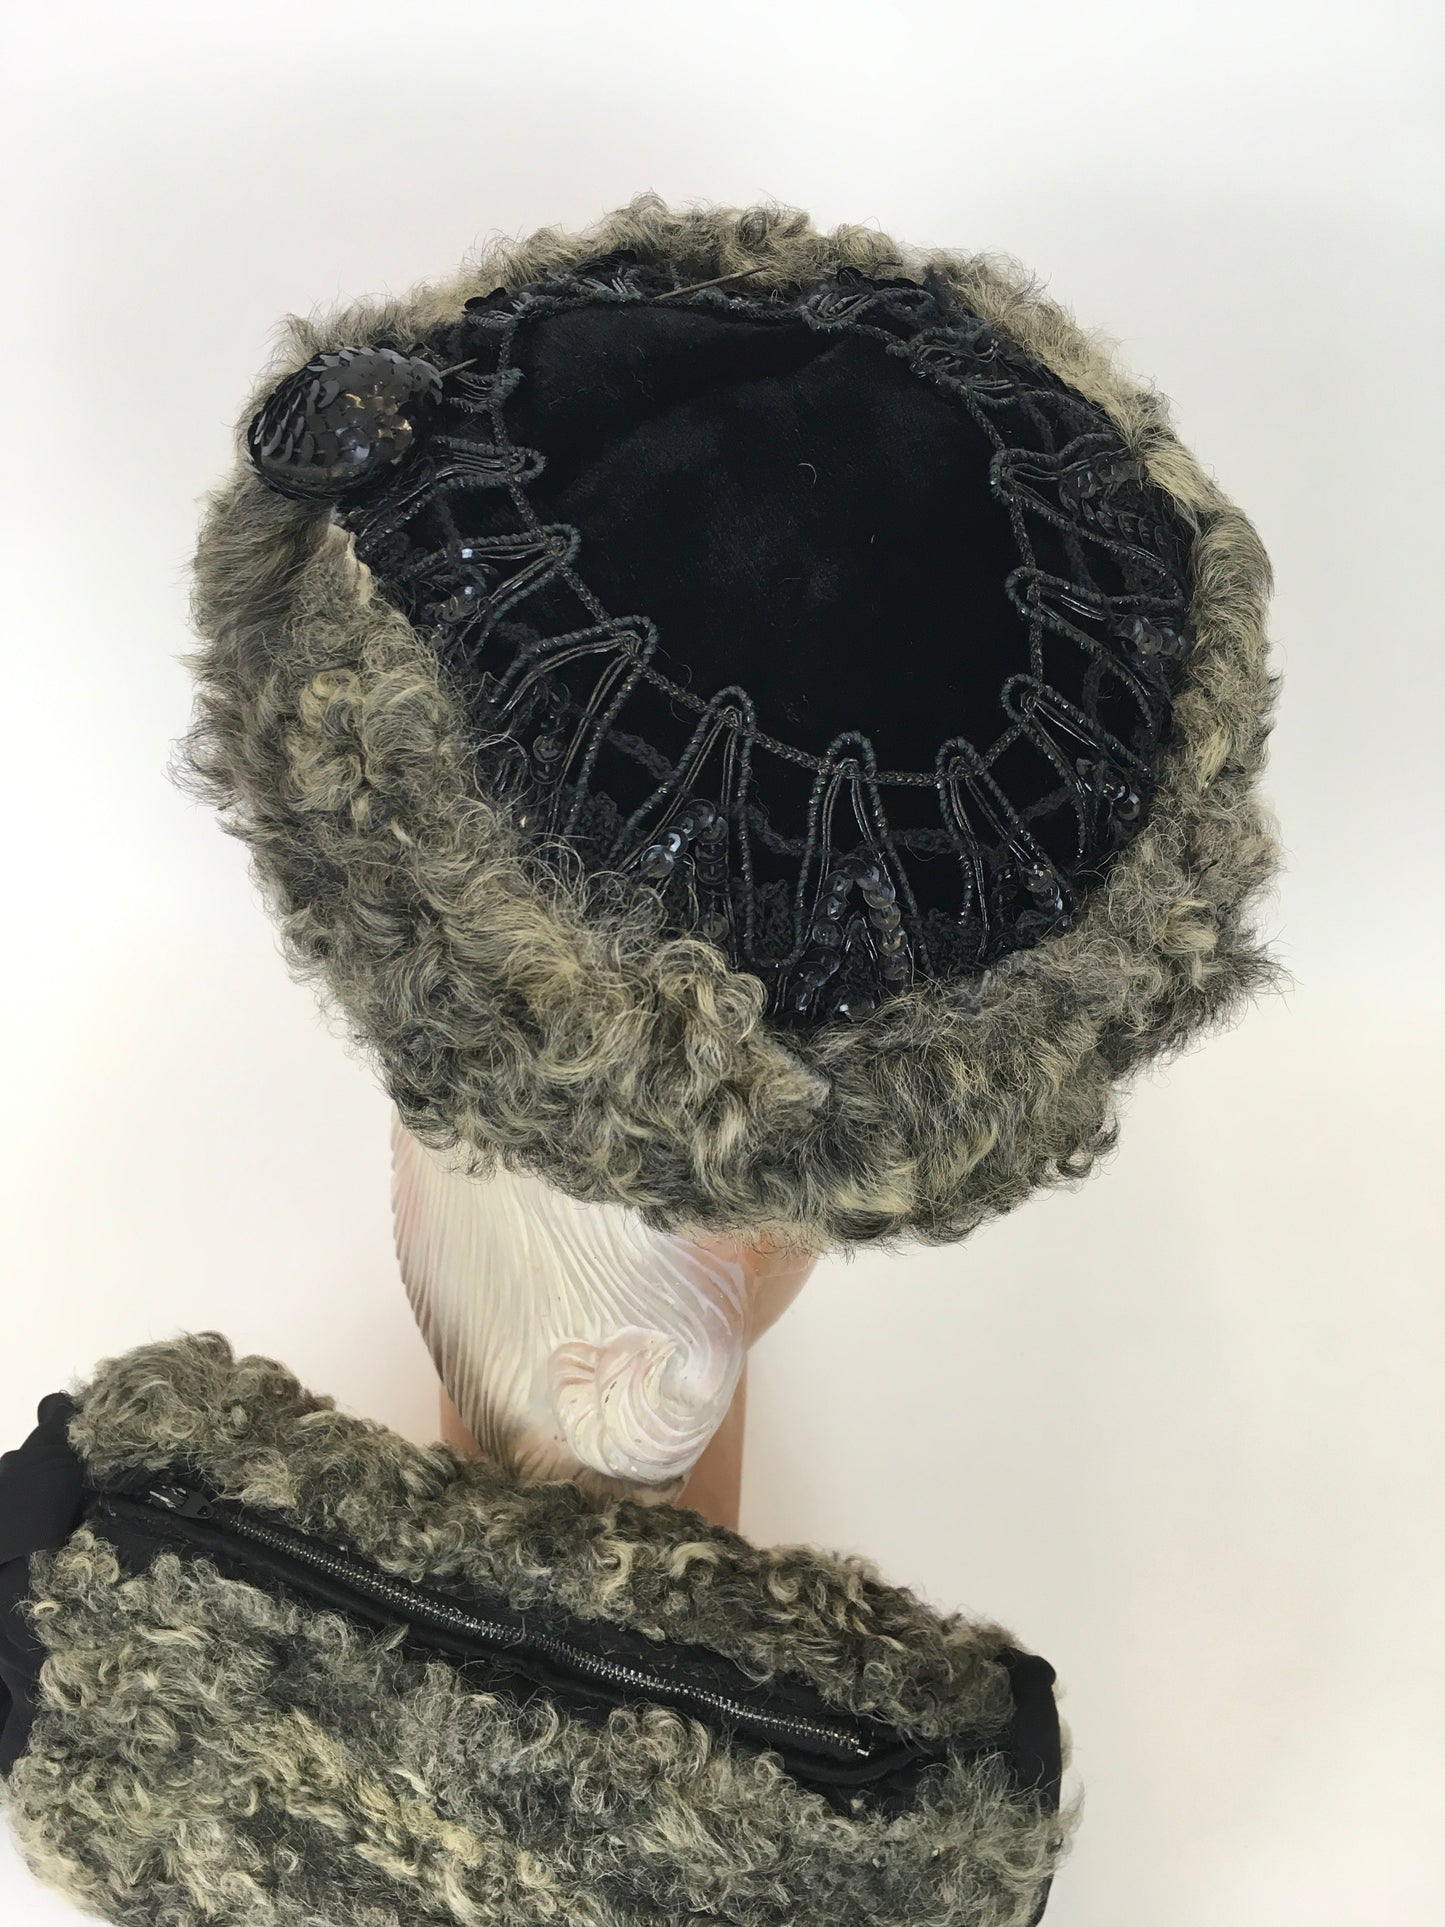 Original 1940s Gorgeous Hat & Muff 2pc Set - In a Lovely Grey Astrakhan and Black Velvet with Trim